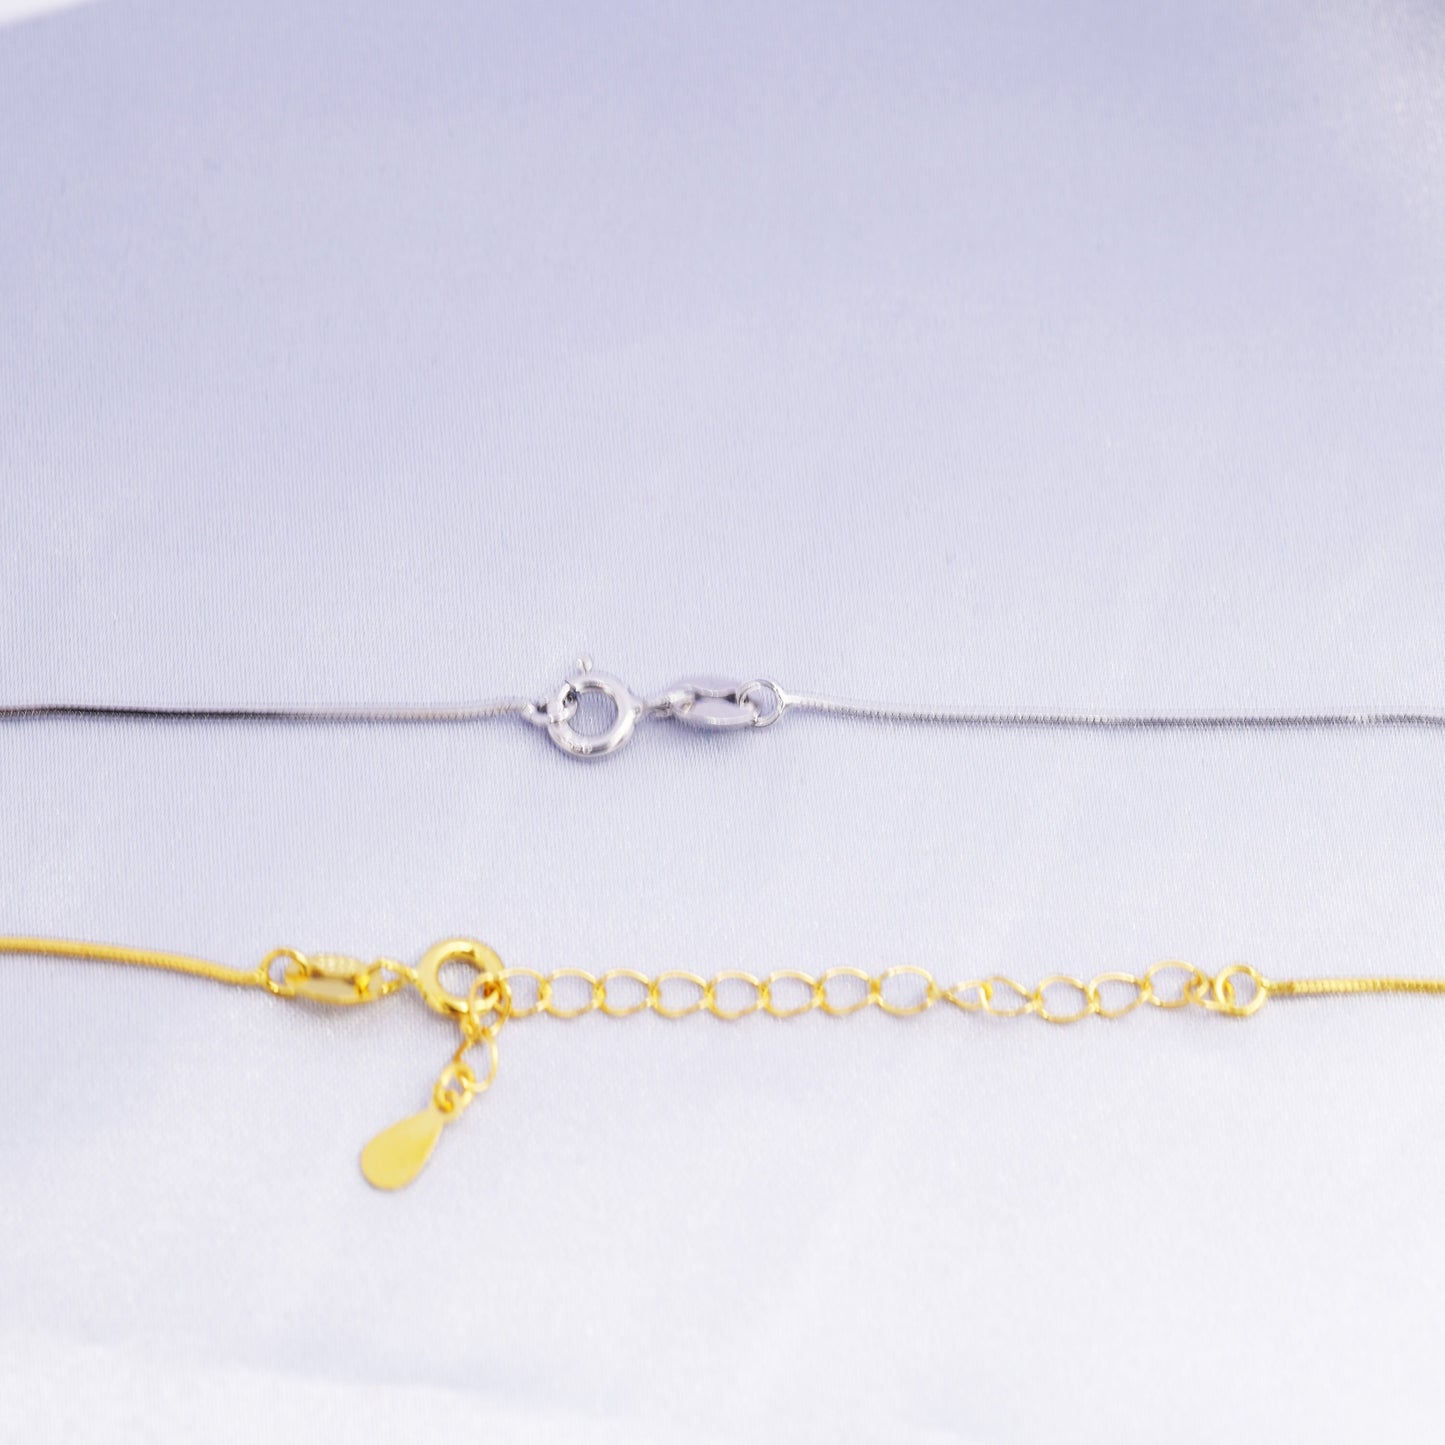 Plain Choker Chain in Sterling Silver, Silver or Gold, Plain Snake Chain Necklace, Skinny and Delicate Collar Necklace